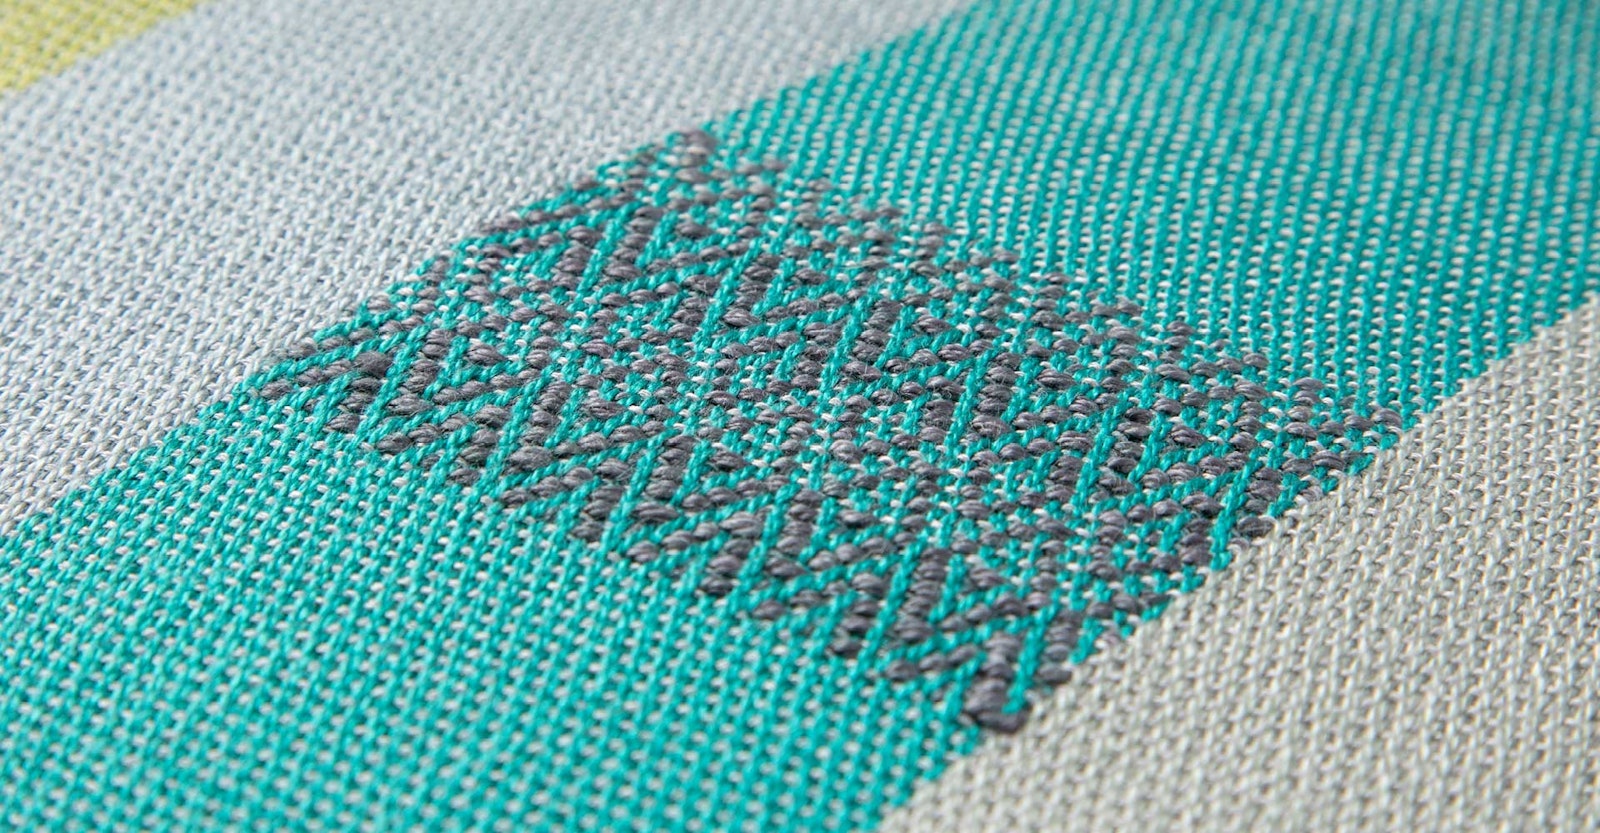 Patterned Inlay on a Plain-Weave Background